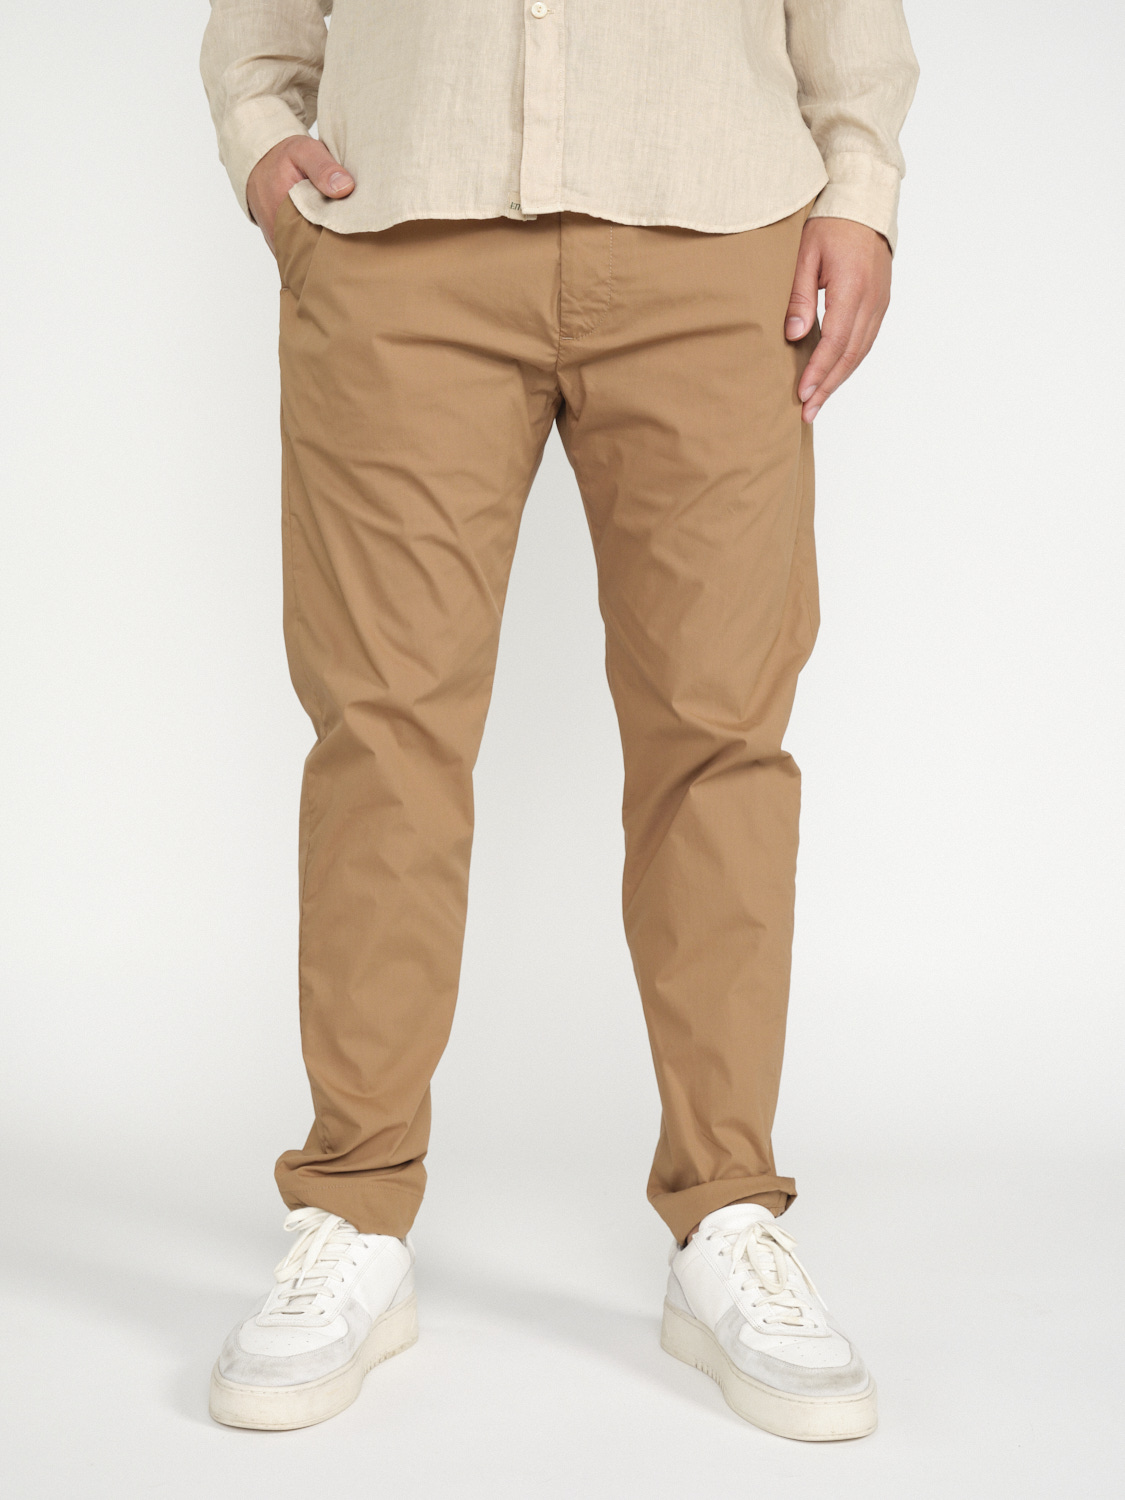 nine in the morning Yoga – cotton blend trousers in chino style  camel 50